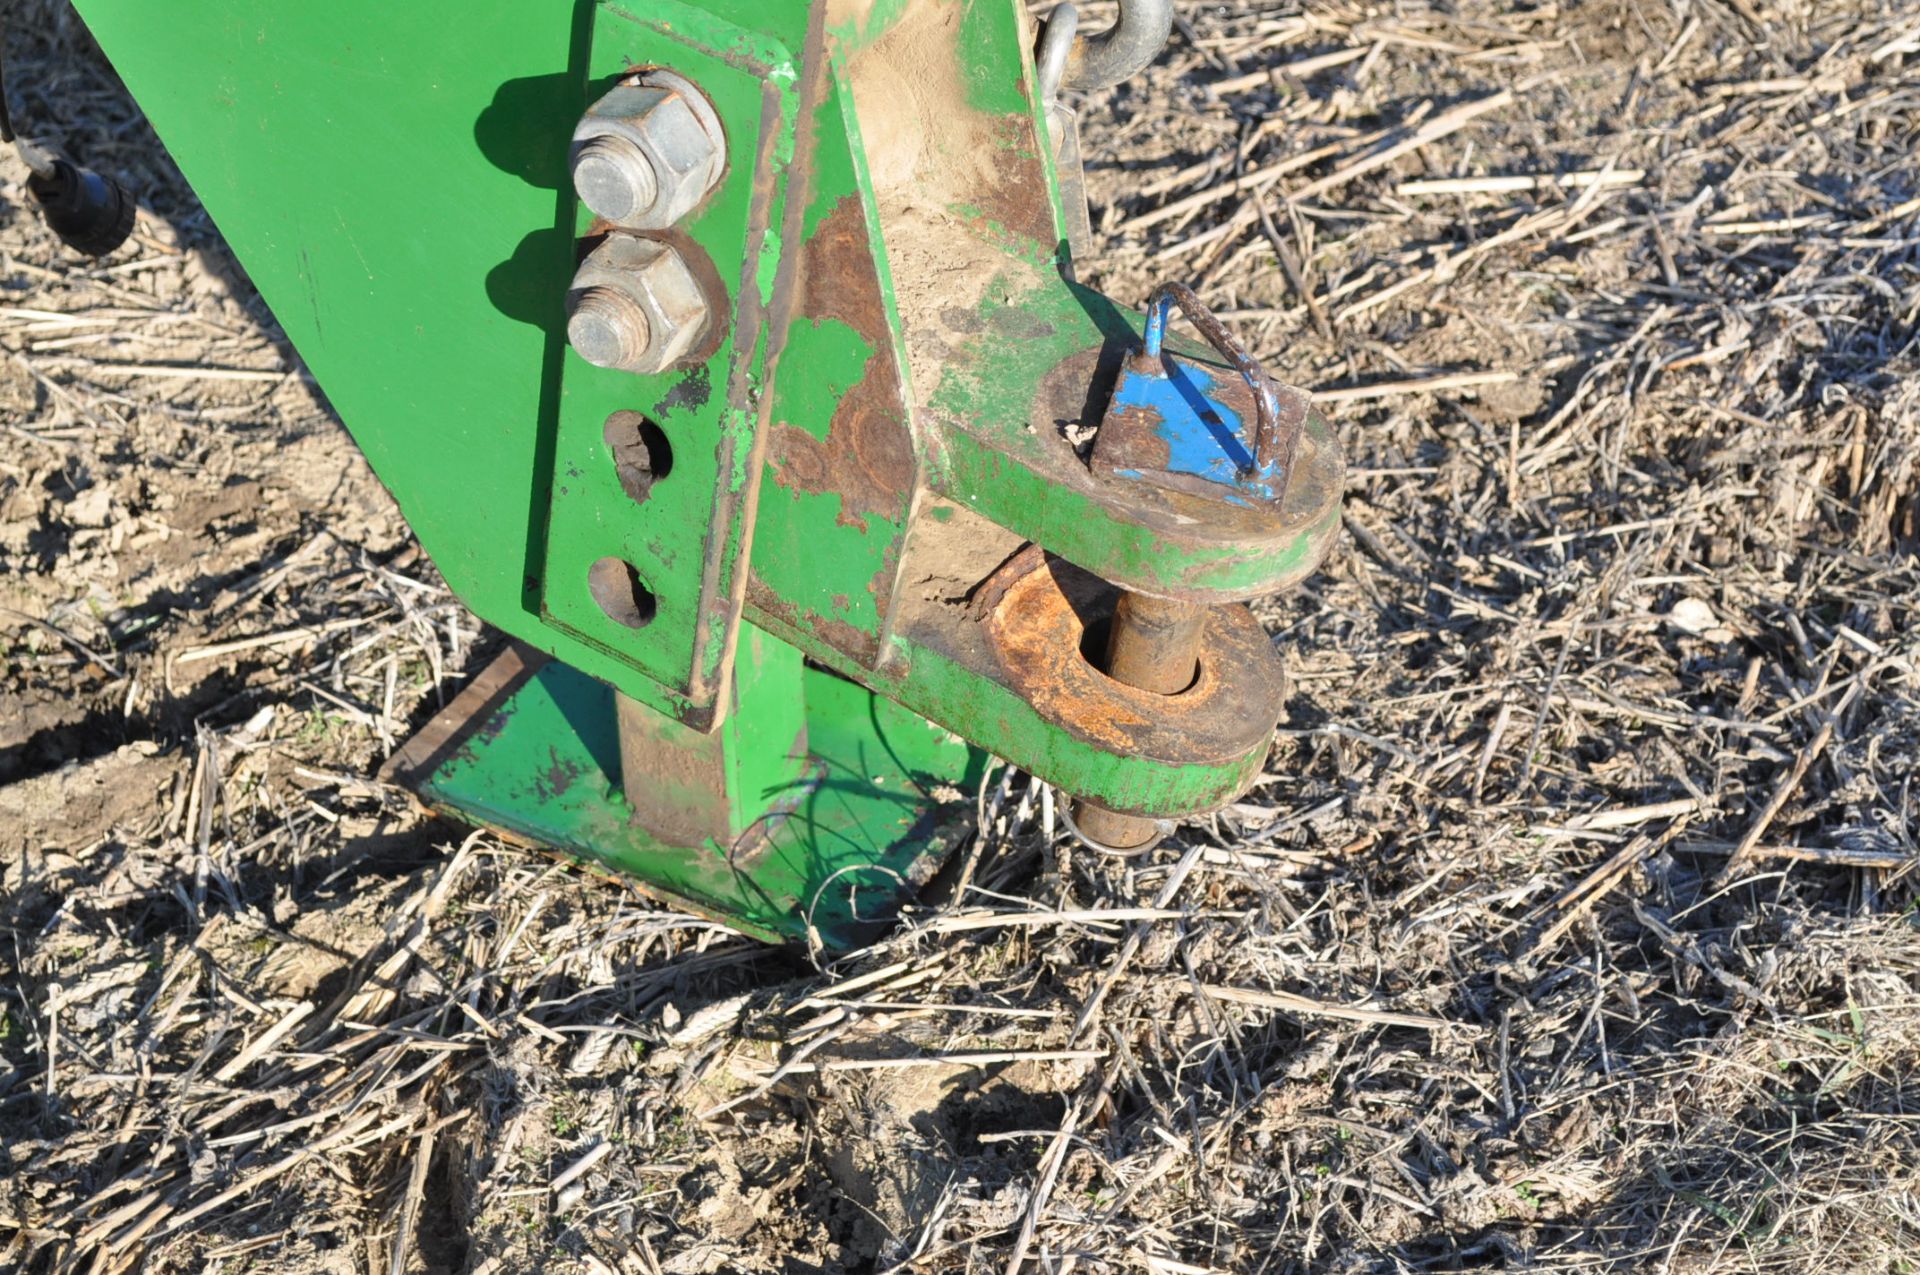 24’ Great Plains Solid Stand 2410NT drill, no-till coulters, seed loc wheel, single rubber press - Image 5 of 17